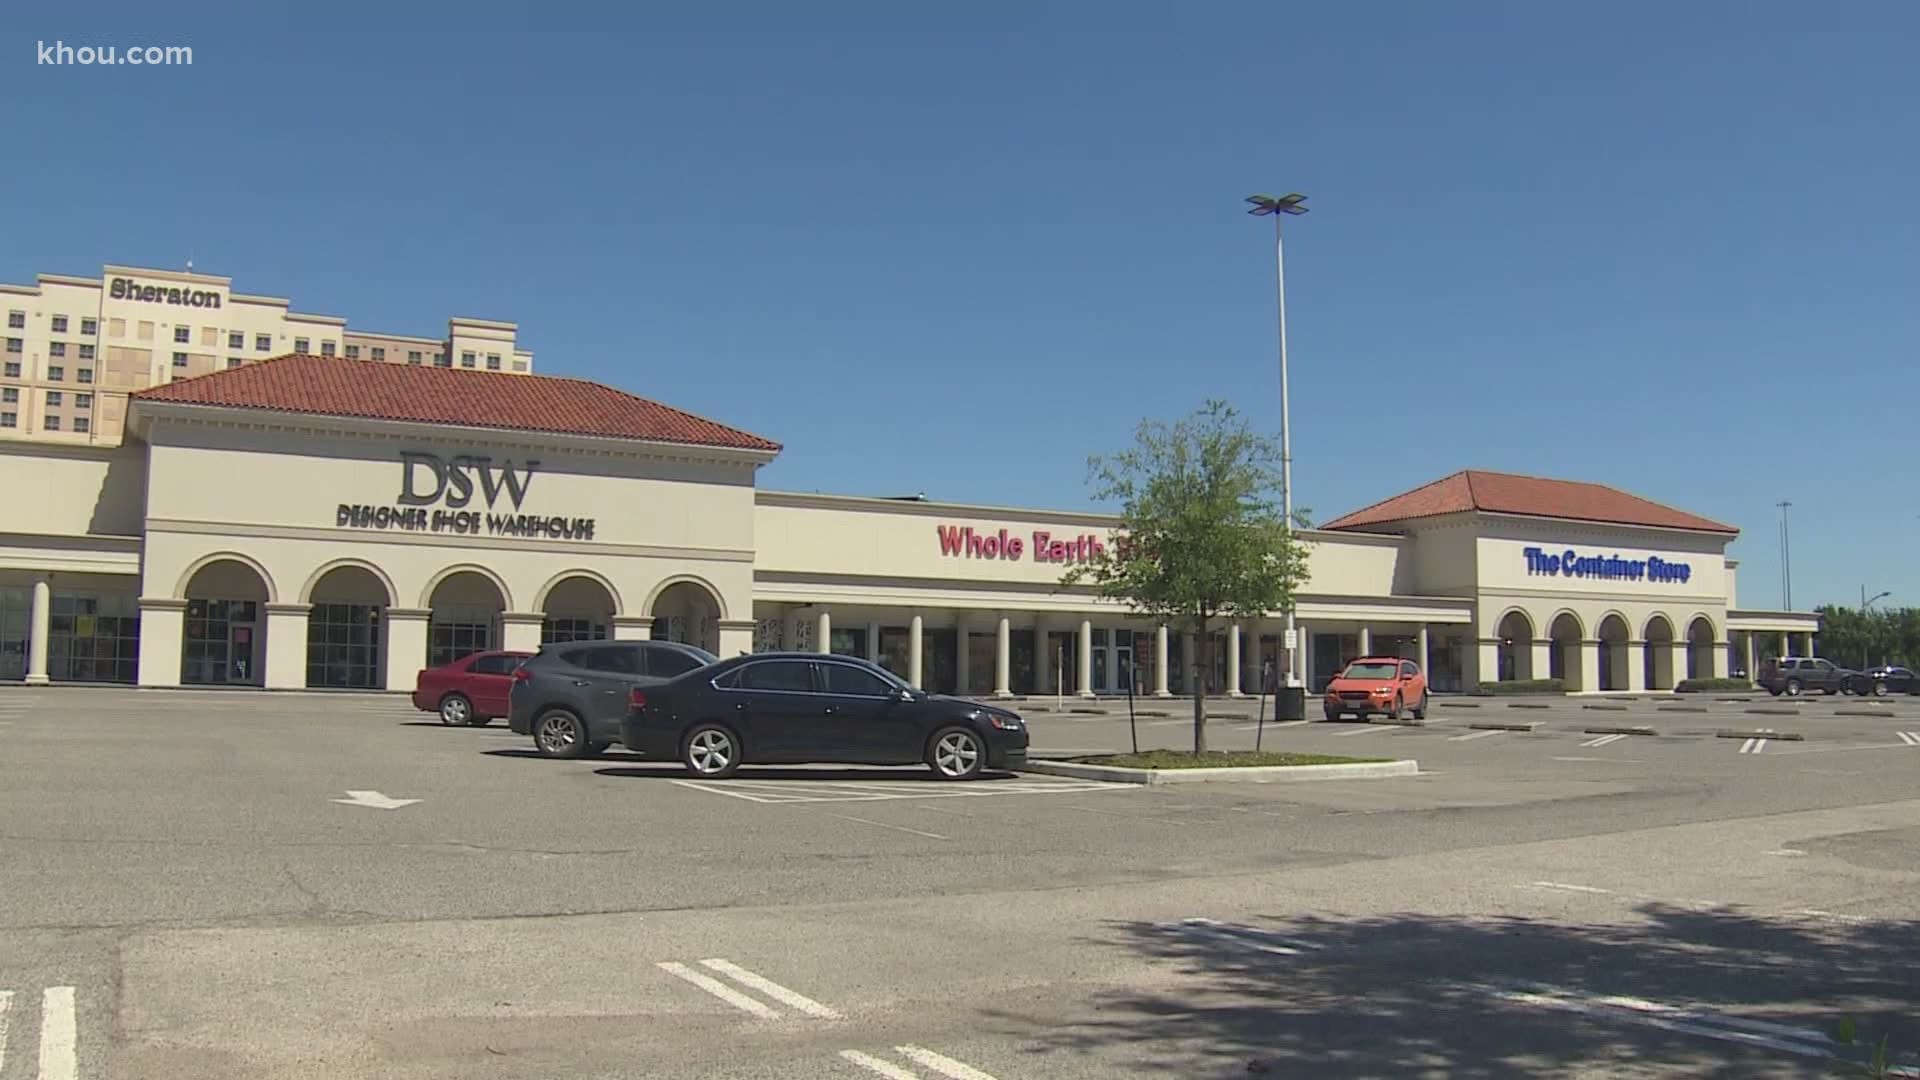 Several malls in the Houston area that shut down due to the COVID-19 pandemic are preparing to offer "retail to-go" options once restrictions are lifted Friday.